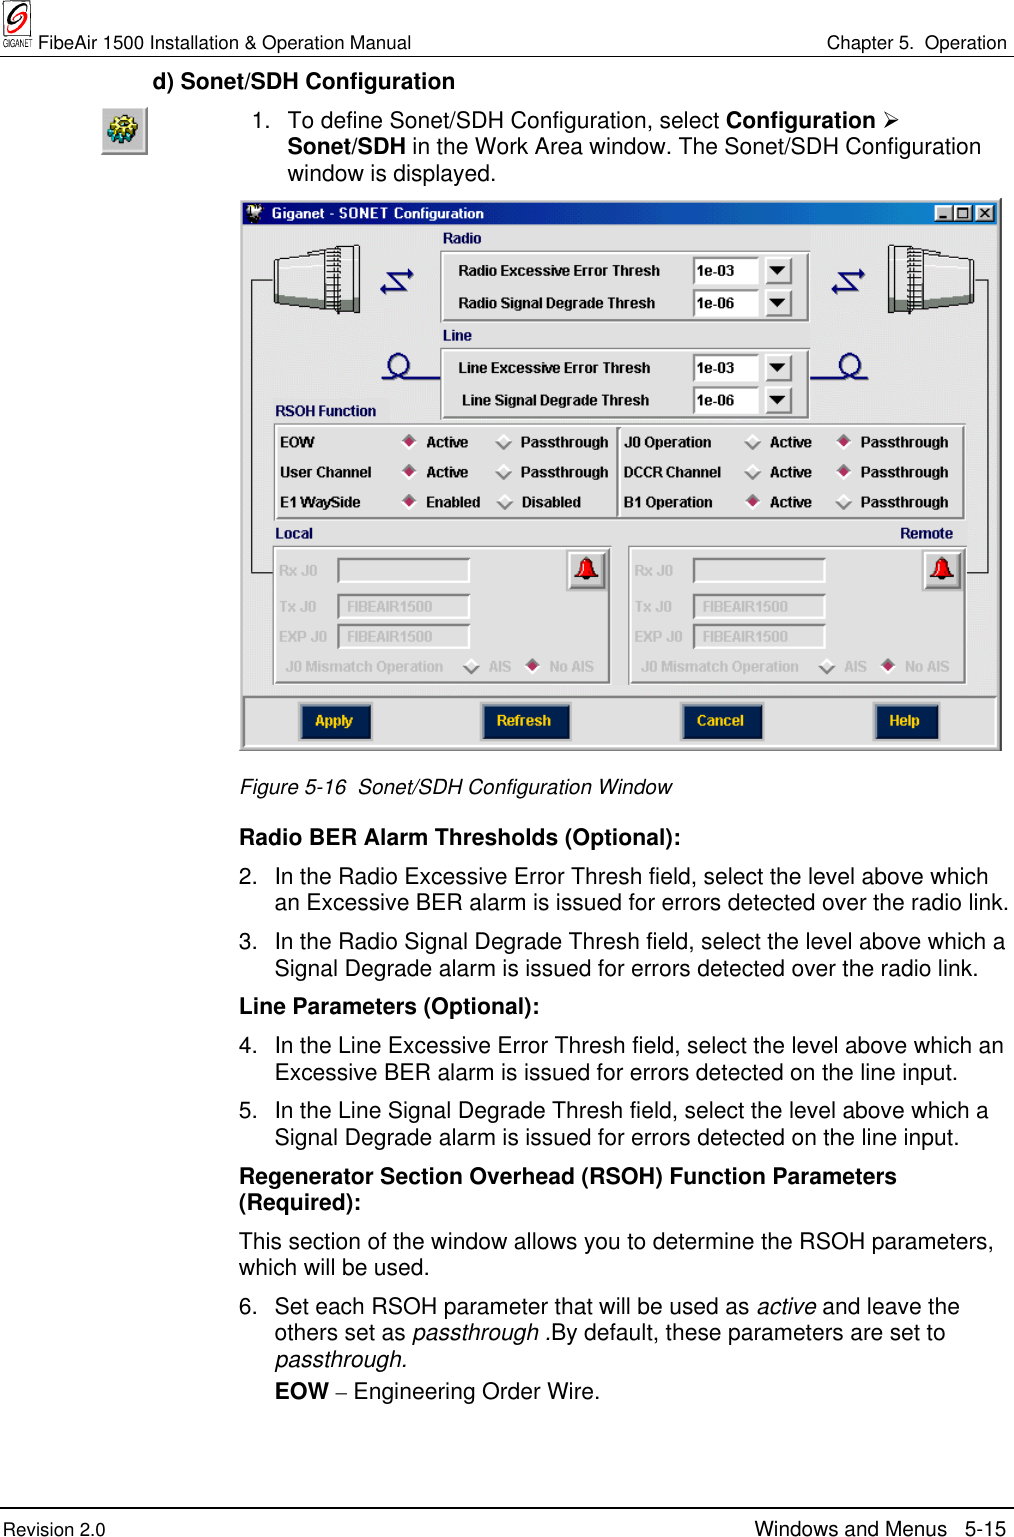  FibeAir 1500 Installation &amp; Operation Manual Chapter 5.  OperationRevision 2.0 Windows and Menus 5-15  d) Sonet/SDH Configuration1. To define Sonet/SDH Configuration, select Configuration ½Sonet/SDH in the Work Area window. The Sonet/SDH Configurationwindow is displayed.Figure 5-16  Sonet/SDH Configuration WindowRadio BER Alarm Thresholds (Optional):2. In the Radio Excessive Error Thresh field, select the level above whichan Excessive BER alarm is issued for errors detected over the radio link.3. In the Radio Signal Degrade Thresh field, select the level above which aSignal Degrade alarm is issued for errors detected over the radio link.Line Parameters (Optional):4. In the Line Excessive Error Thresh field, select the level above which anExcessive BER alarm is issued for errors detected on the line input.5. In the Line Signal Degrade Thresh field, select the level above which aSignal Degrade alarm is issued for errors detected on the line input.Regenerator Section Overhead (RSOH) Function Parameters(Required):This section of the window allows you to determine the RSOH parameters,which will be used.6. Set each RSOH parameter that will be used as active and leave theothers set as passthrough .By default, these parameters are set topassthrough.EOW – Engineering Order Wire.